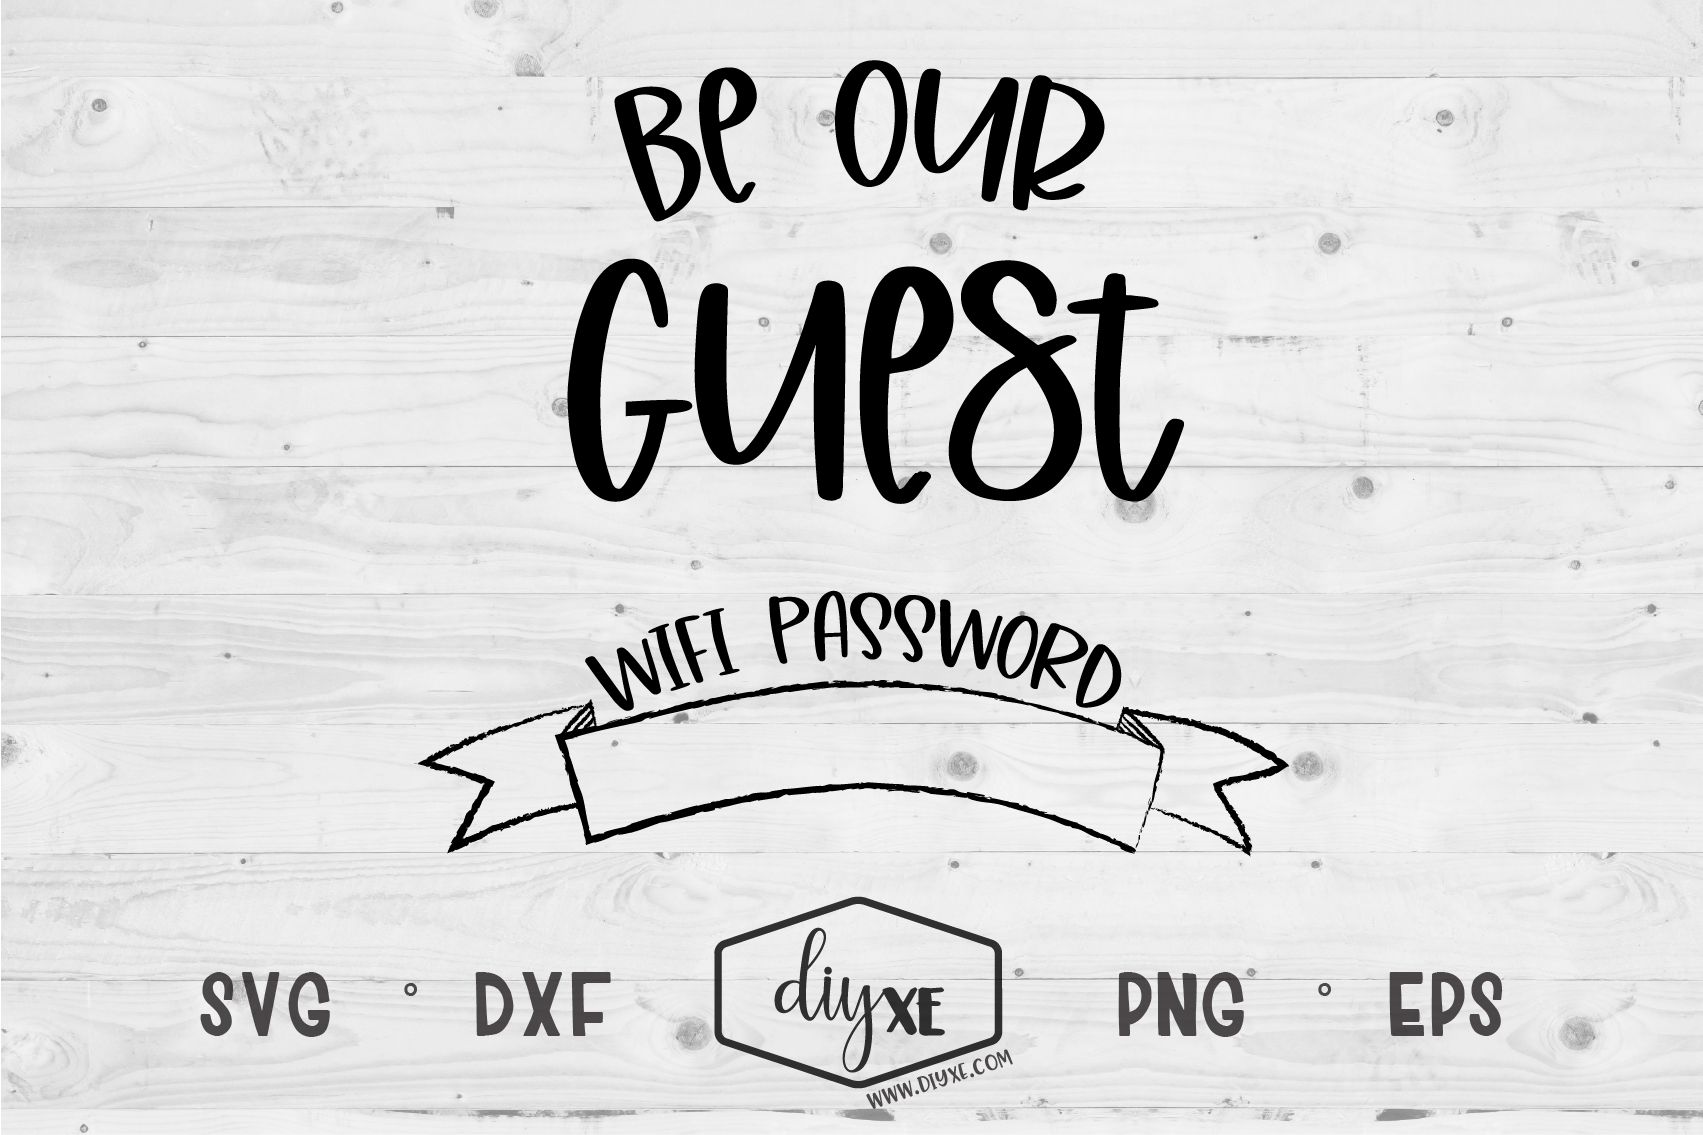 100-be-our-guest-wifi-sign-printable-340450-be-our-guest-wifi-free-printable-mbaheblogjpuzlt